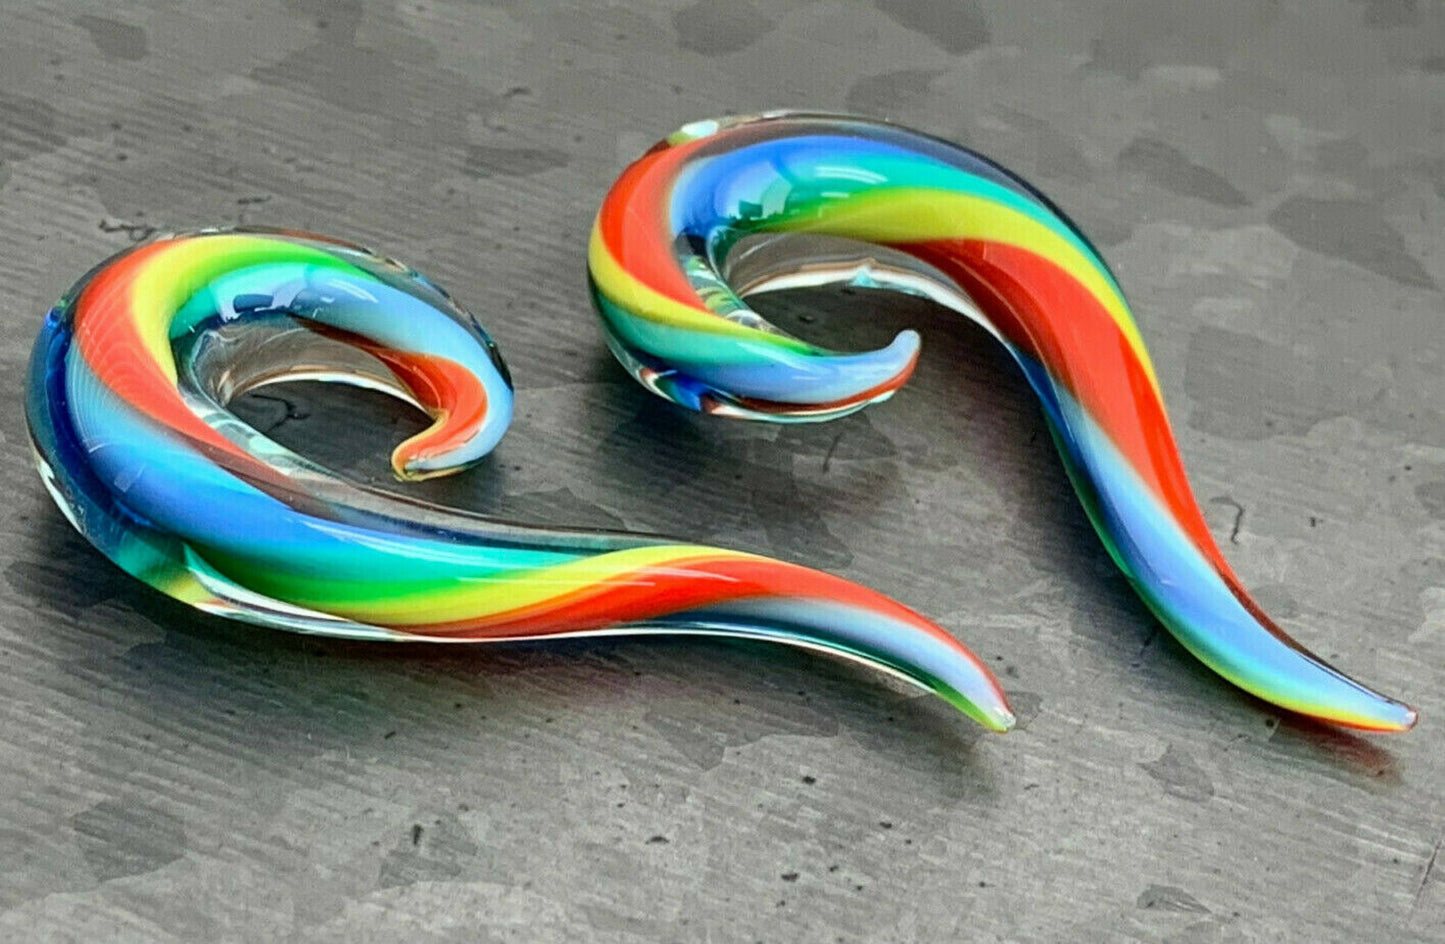 PAIR of Unique Rainbow Glass Spiral Taper Plugs - Expanders Gauges - 6g (4mm) thru 00g (10mm) available!